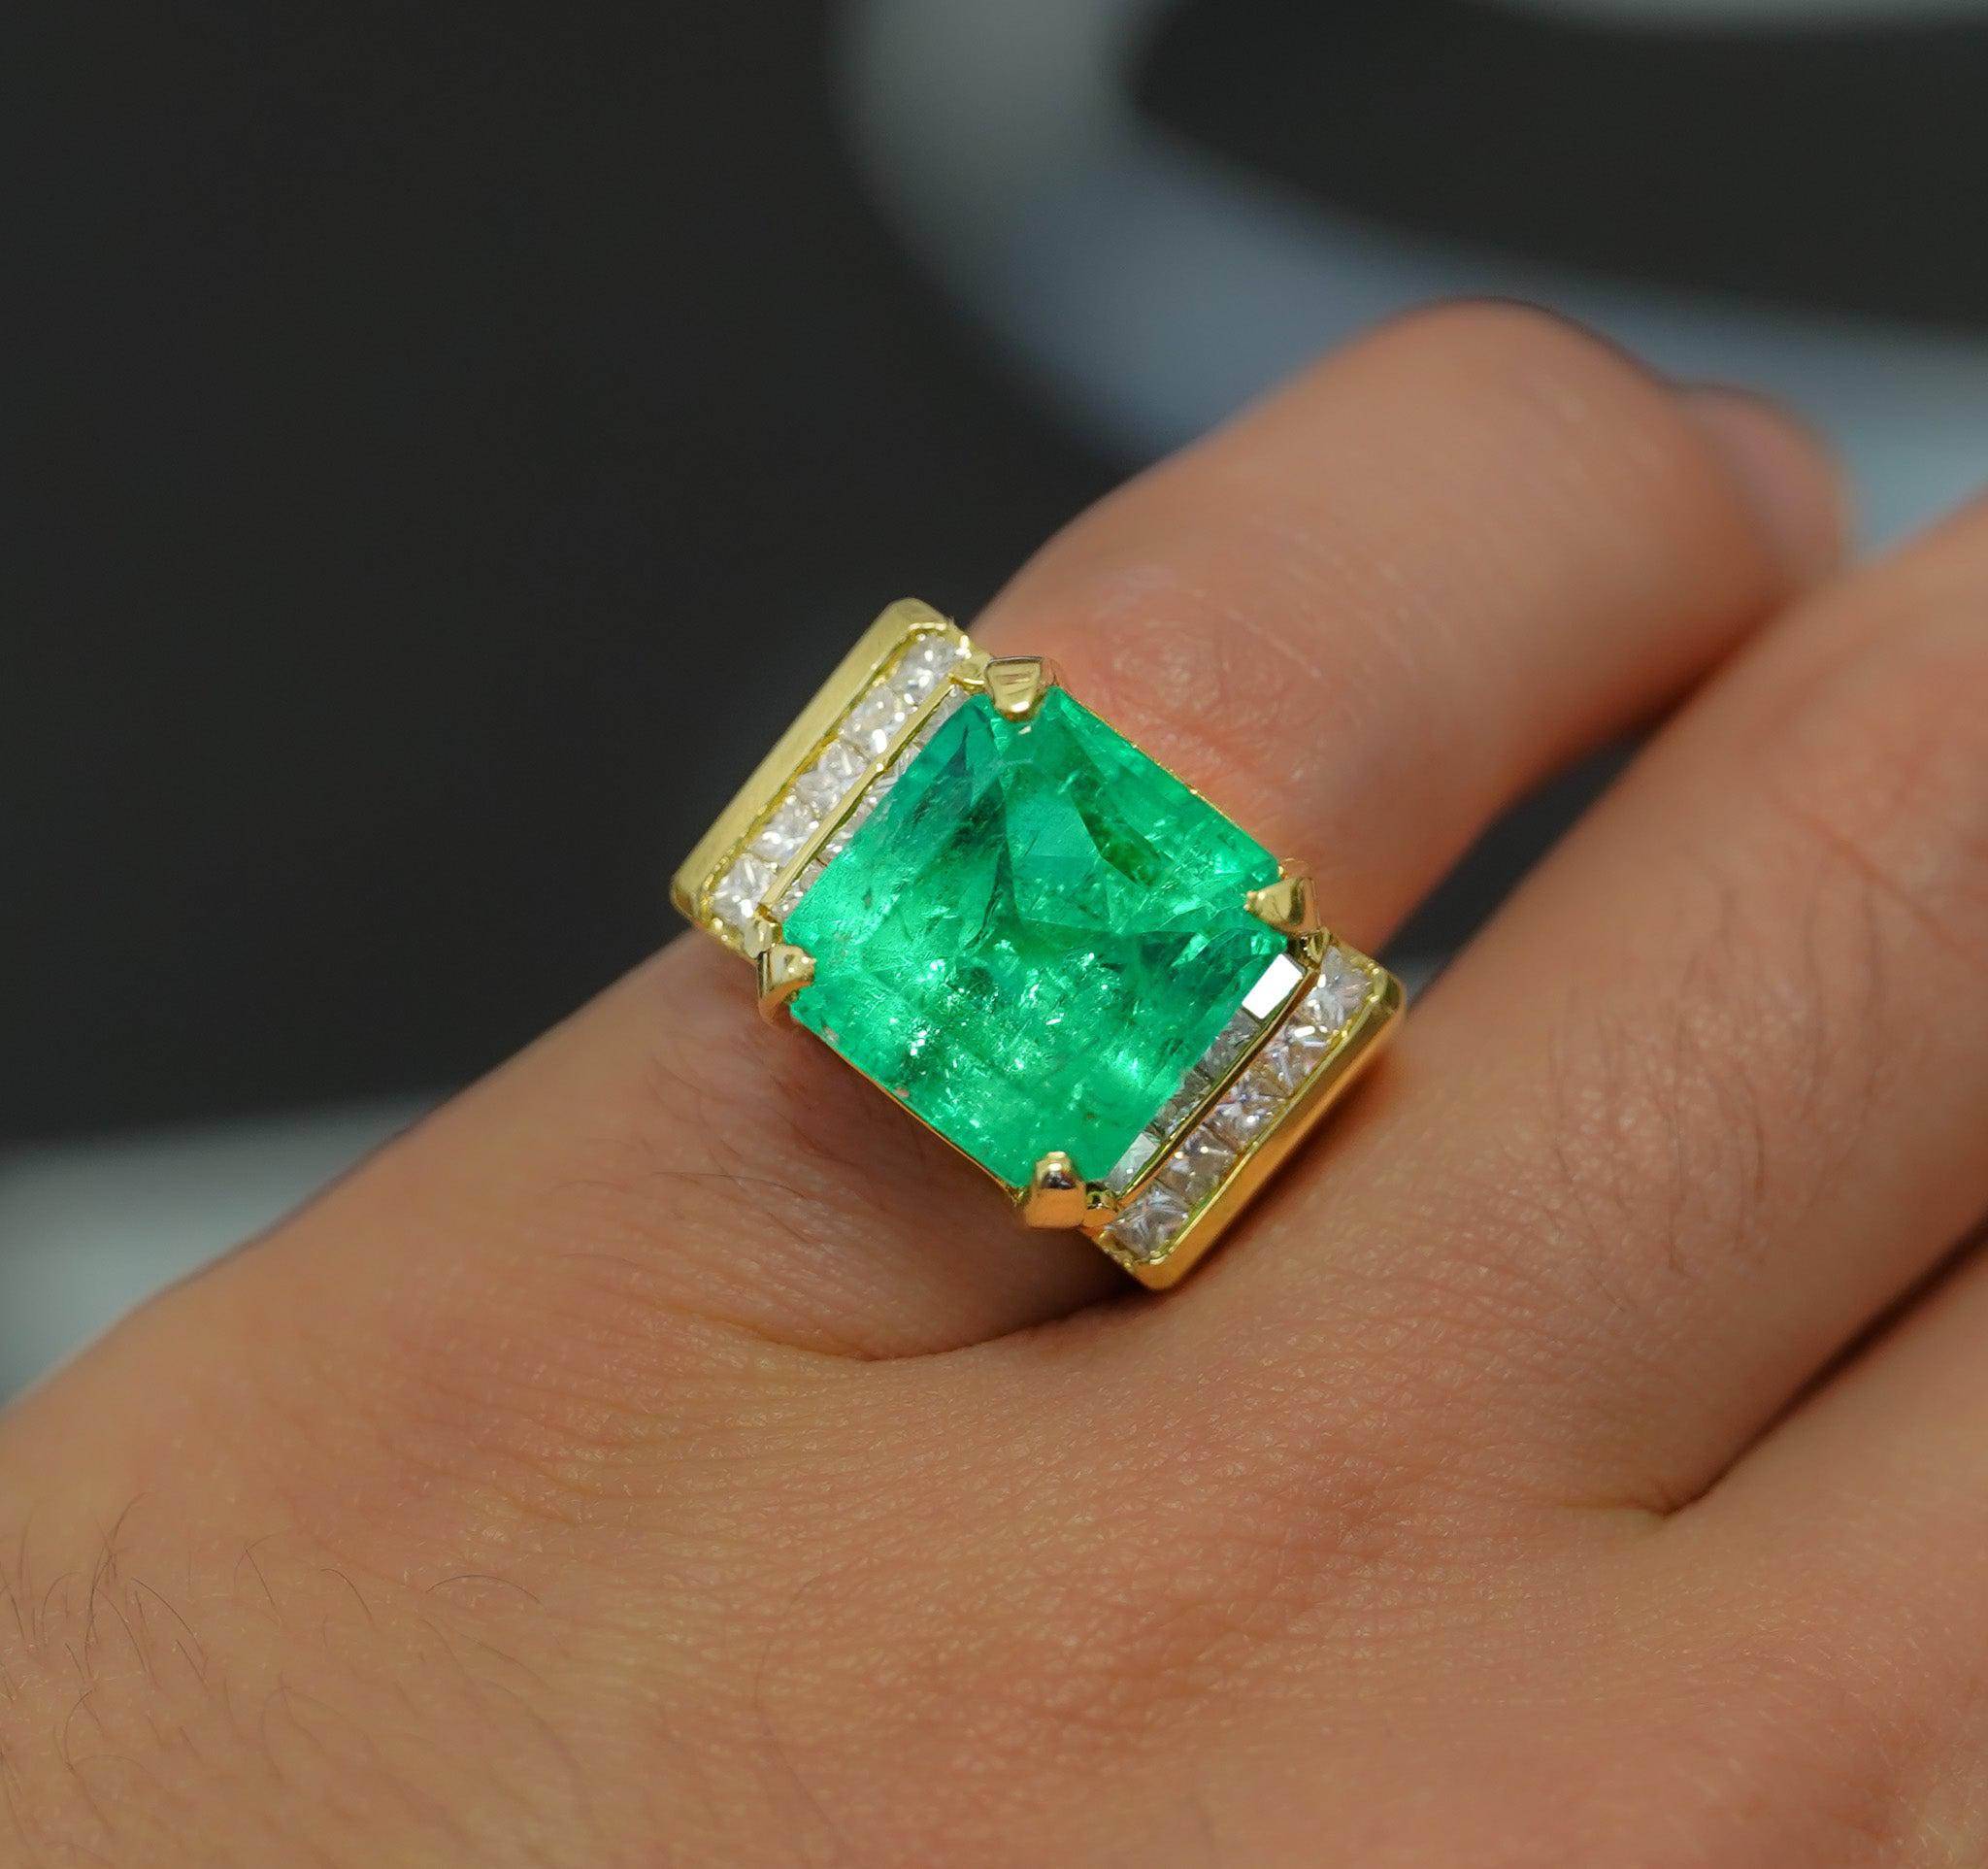 GIA Certified 13 Carat Colombian Emerald Men's Ring in 18K Gold With Princess Cut Diamonds